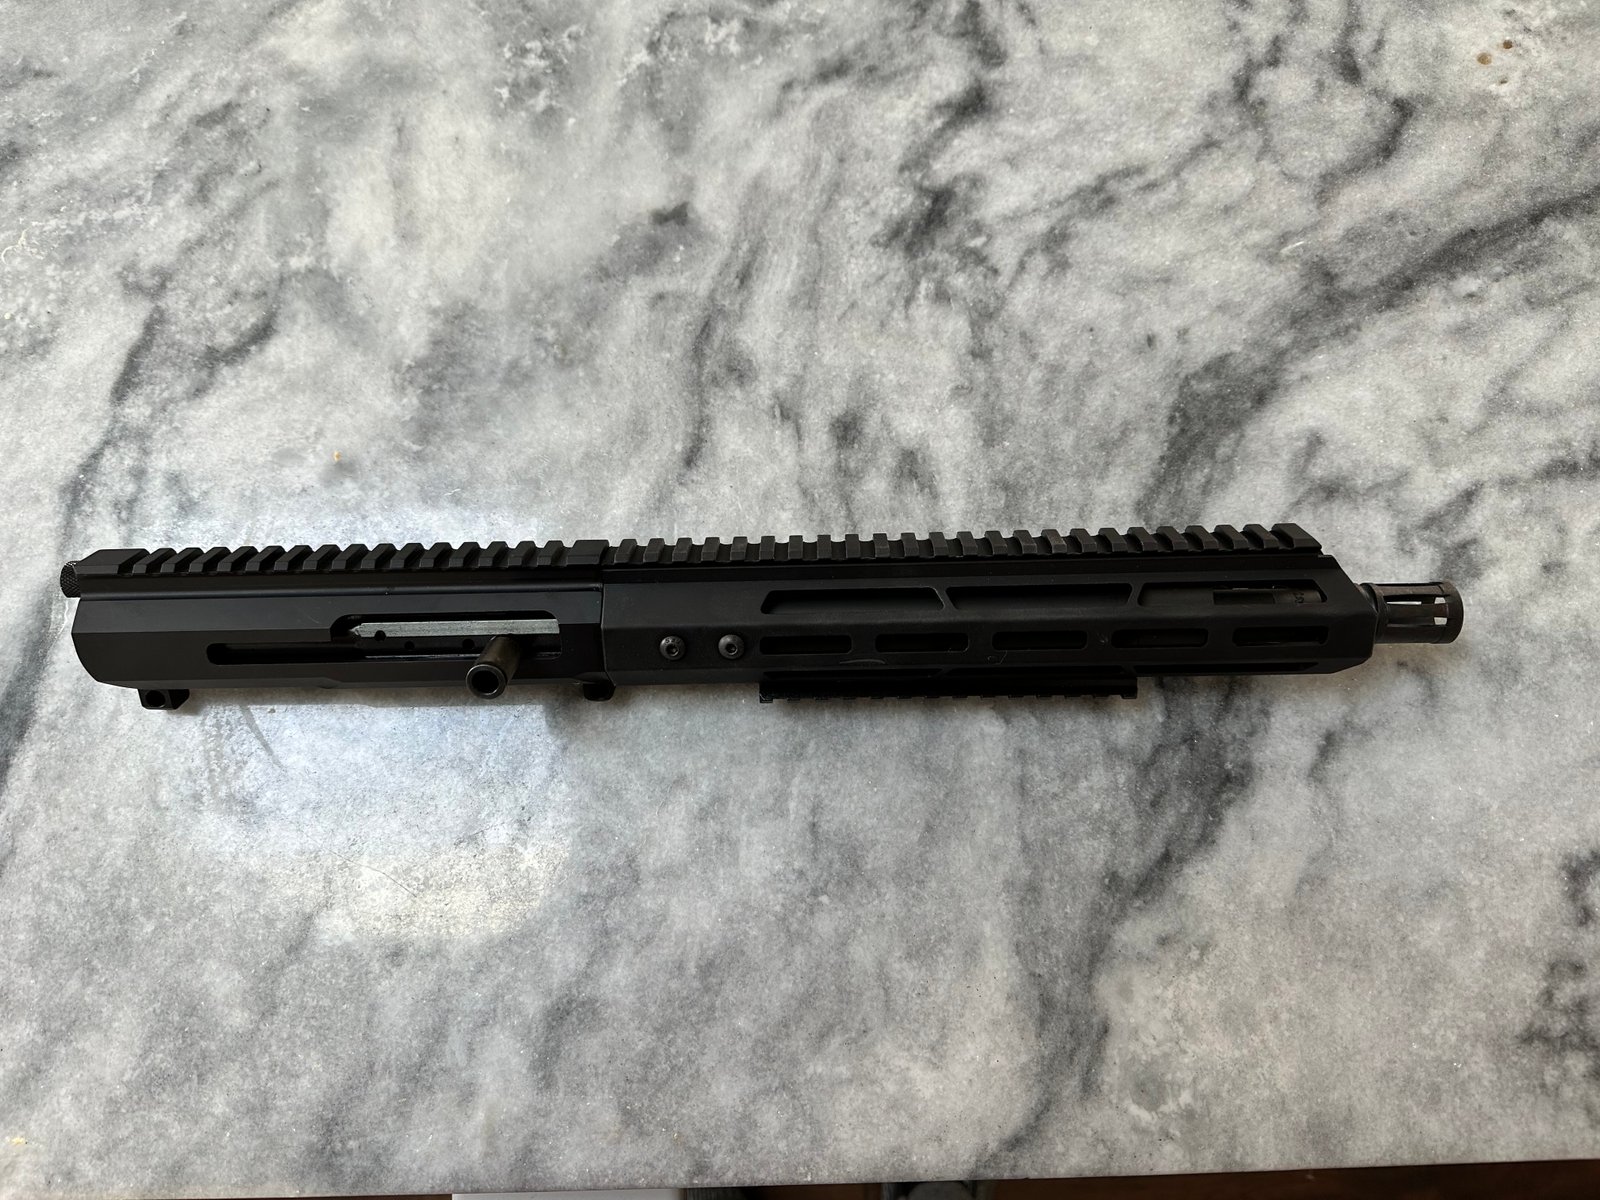 Bear Creek 7.62x39 Complete Upper and 500 rds ammo plus mags